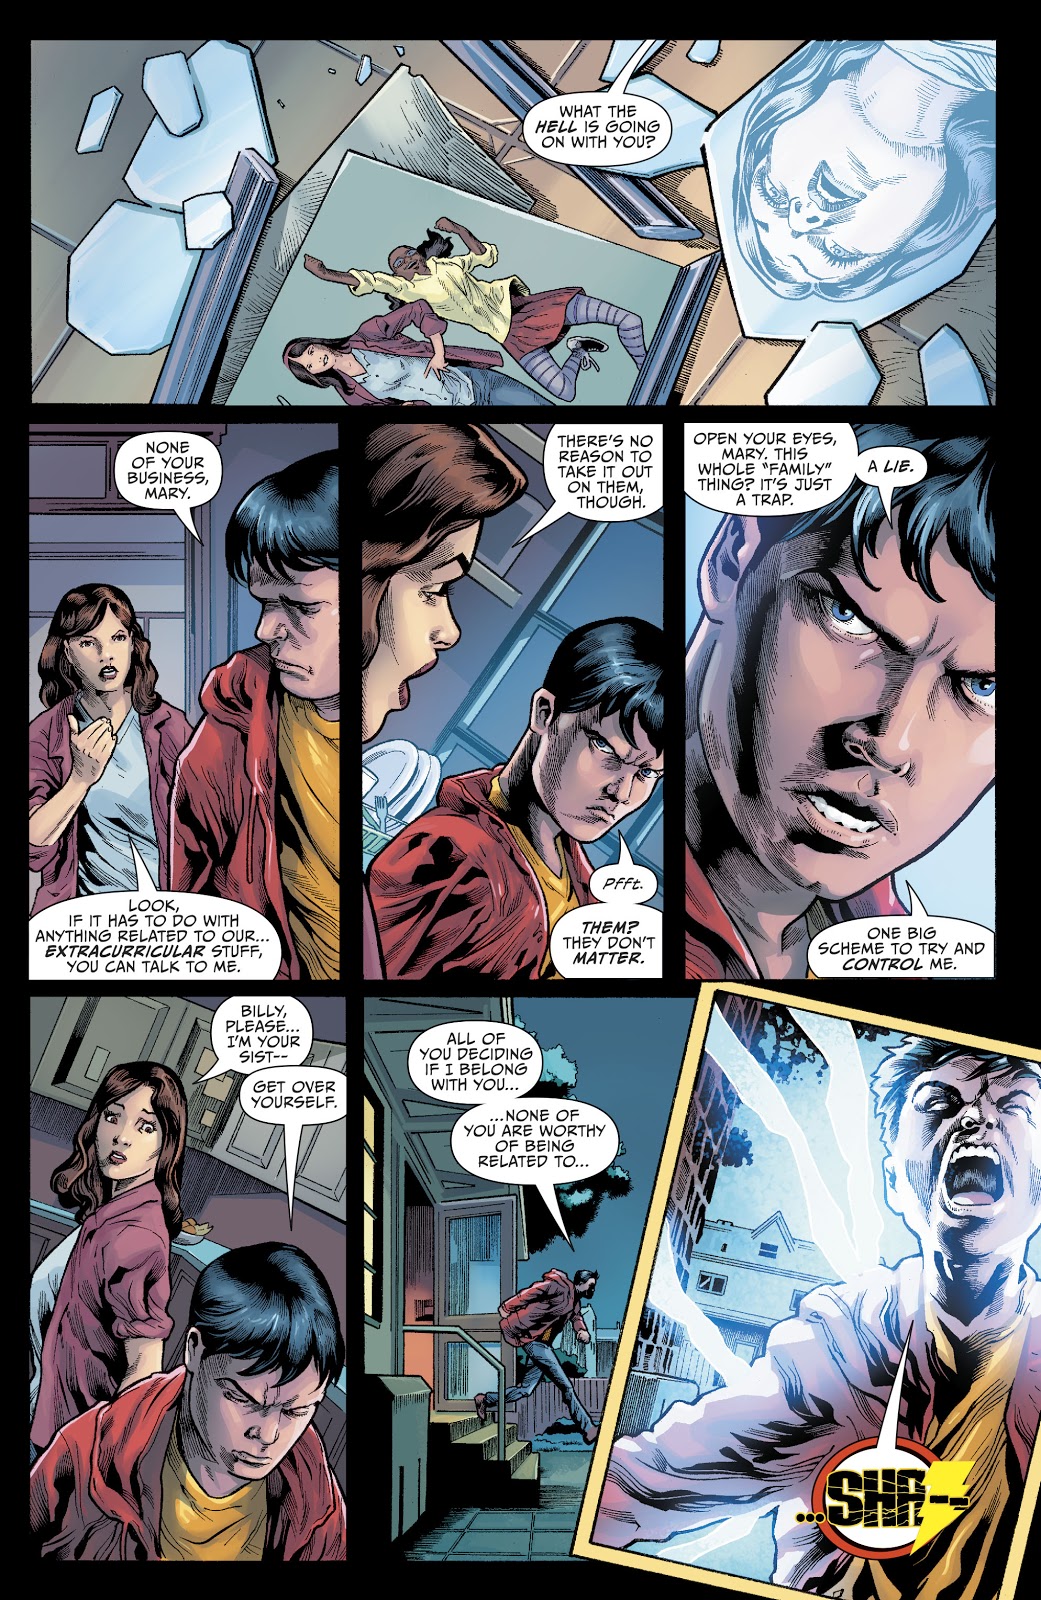 The Shazam Who Laughts (The Infected: King Shazam)